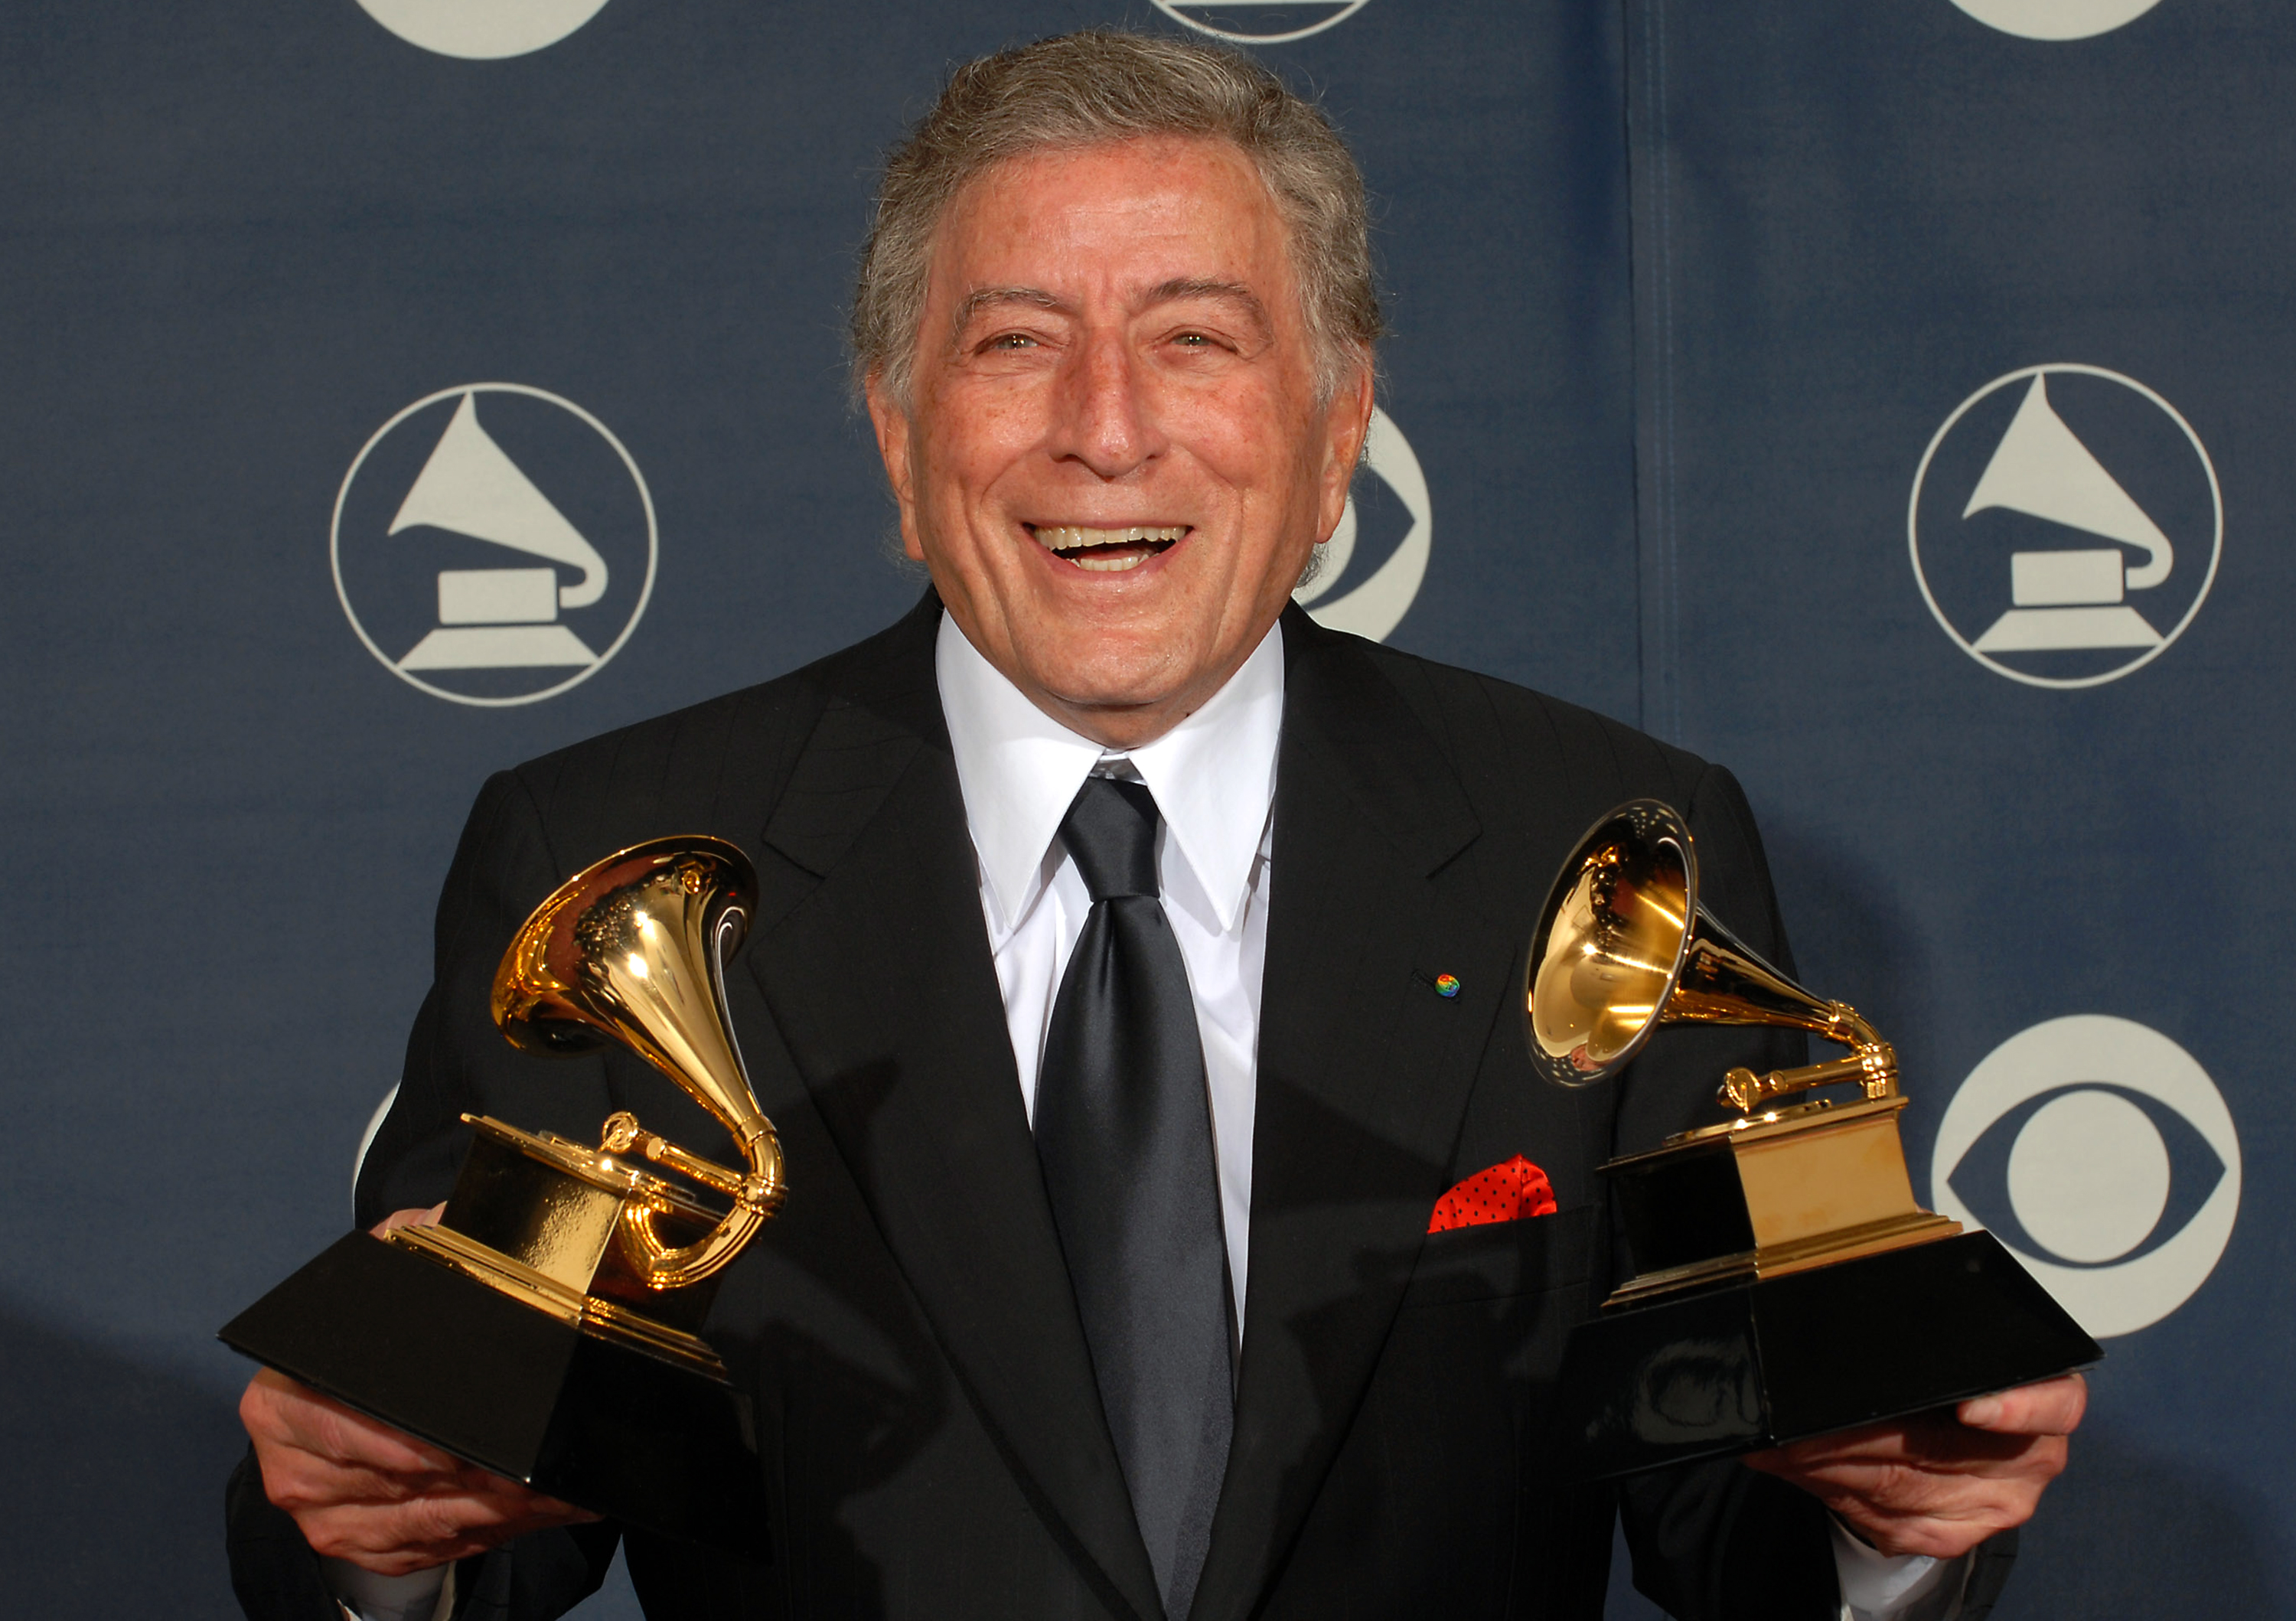 Tony Bennett in California in 2007 | Source: Getty Images